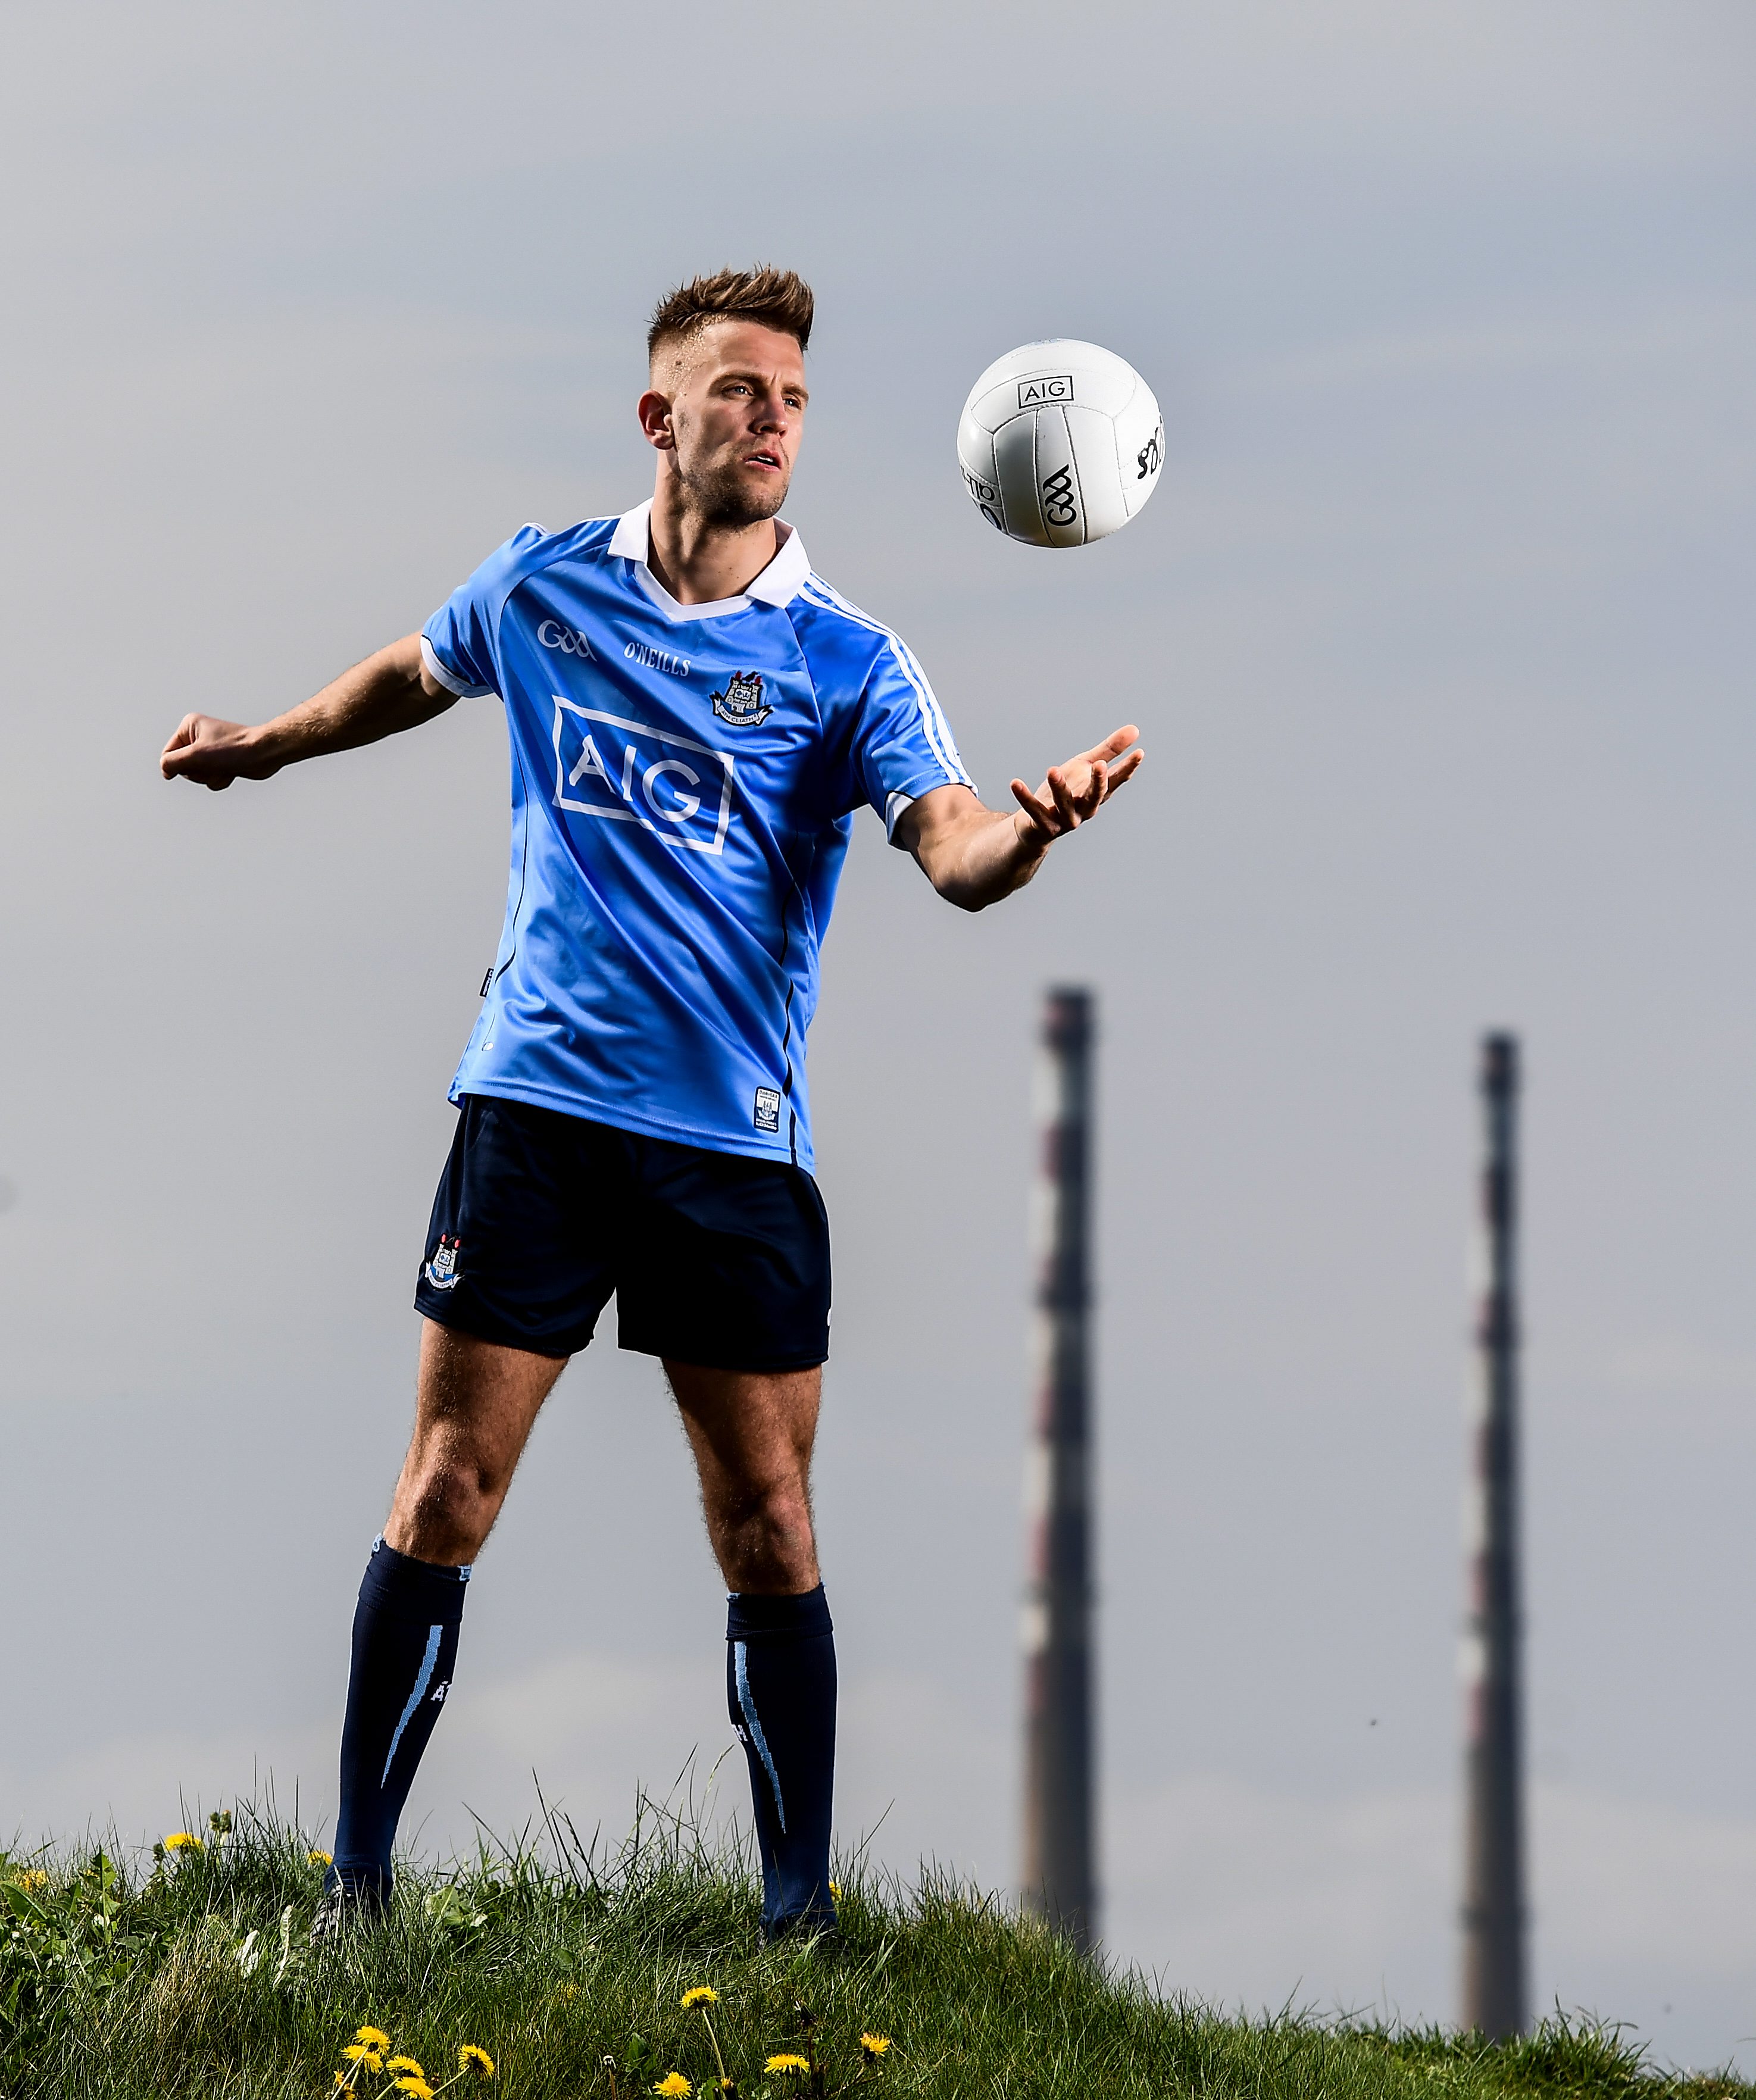 12 May 2016; Dublin stars Ali Twomey, Noelle Healy, David Treacy and Jonny Cooper helped Dublin GAA and sponsors AIG Insurance officially launch the new Dublin jersey today. Available at oneills.com and at sports outlets nationwide for 65, the jersey will be worn for the first time in a game by the Dublin minor hurlers on Saturday against Kilkenny. Pictured is Dublin footballer Jonny Cooper. Photo by Stephen McCarthy/Sportsfile